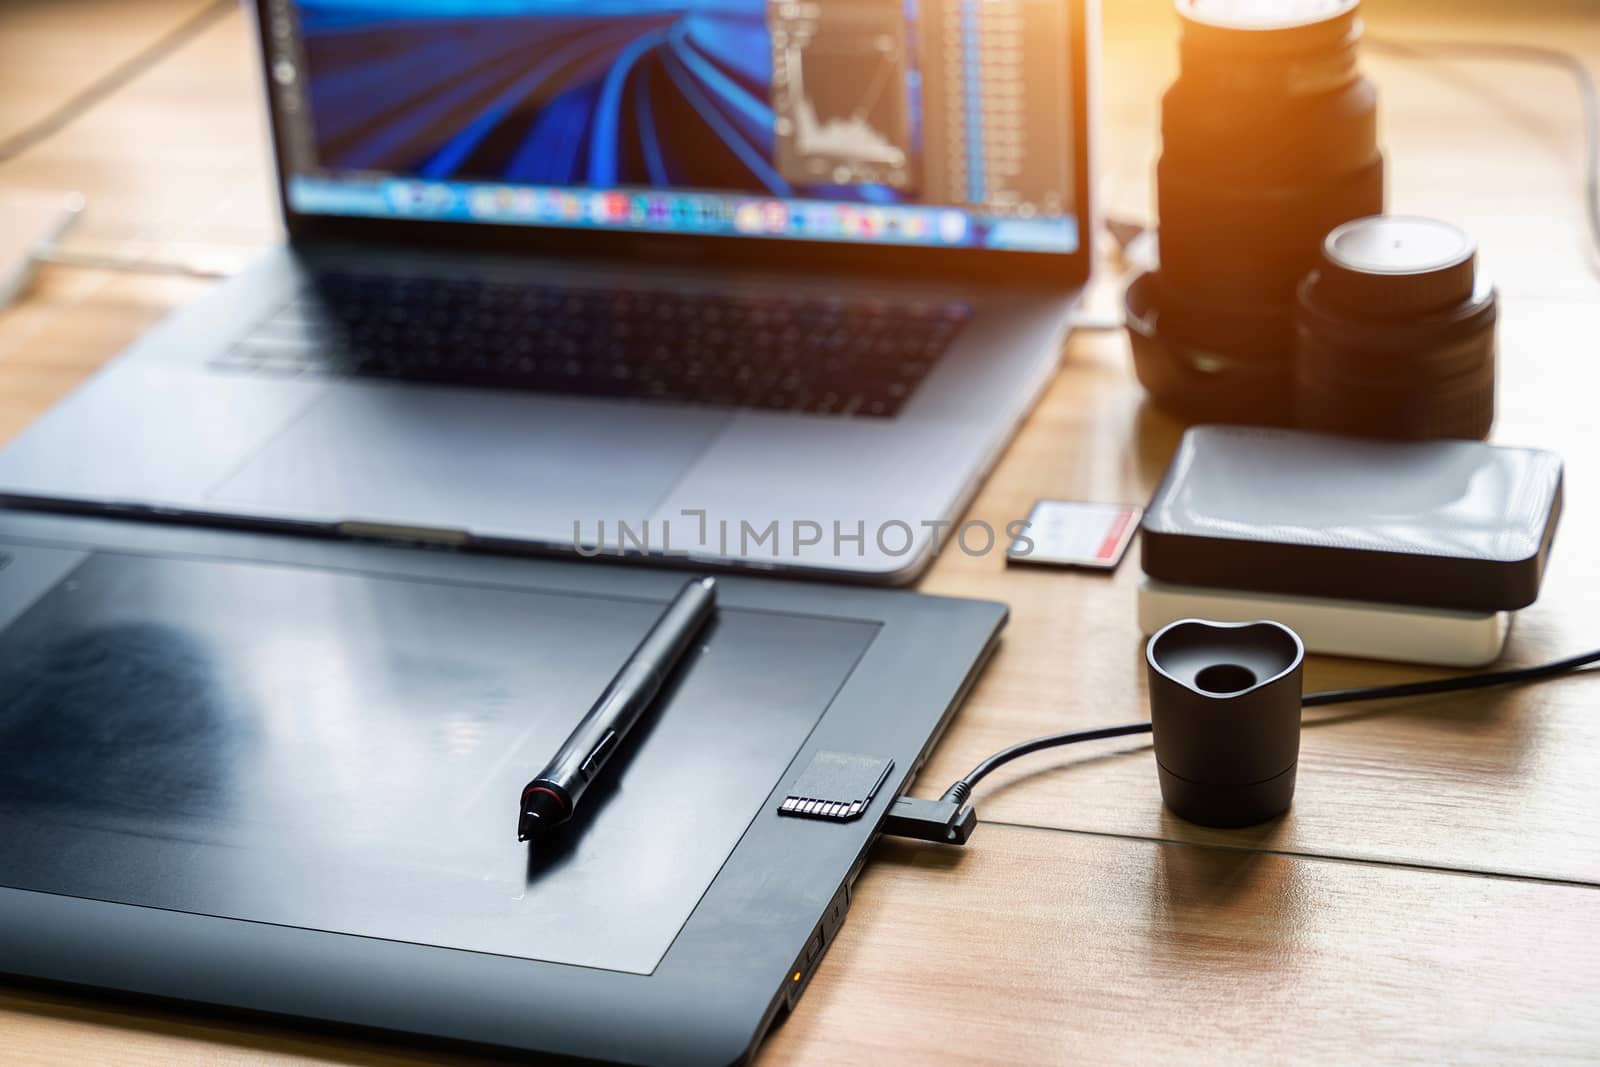 Drawing tablet and laptop computer, harddisk, memory card, camera lens on table. Photographer concept. by gutarphotoghaphy